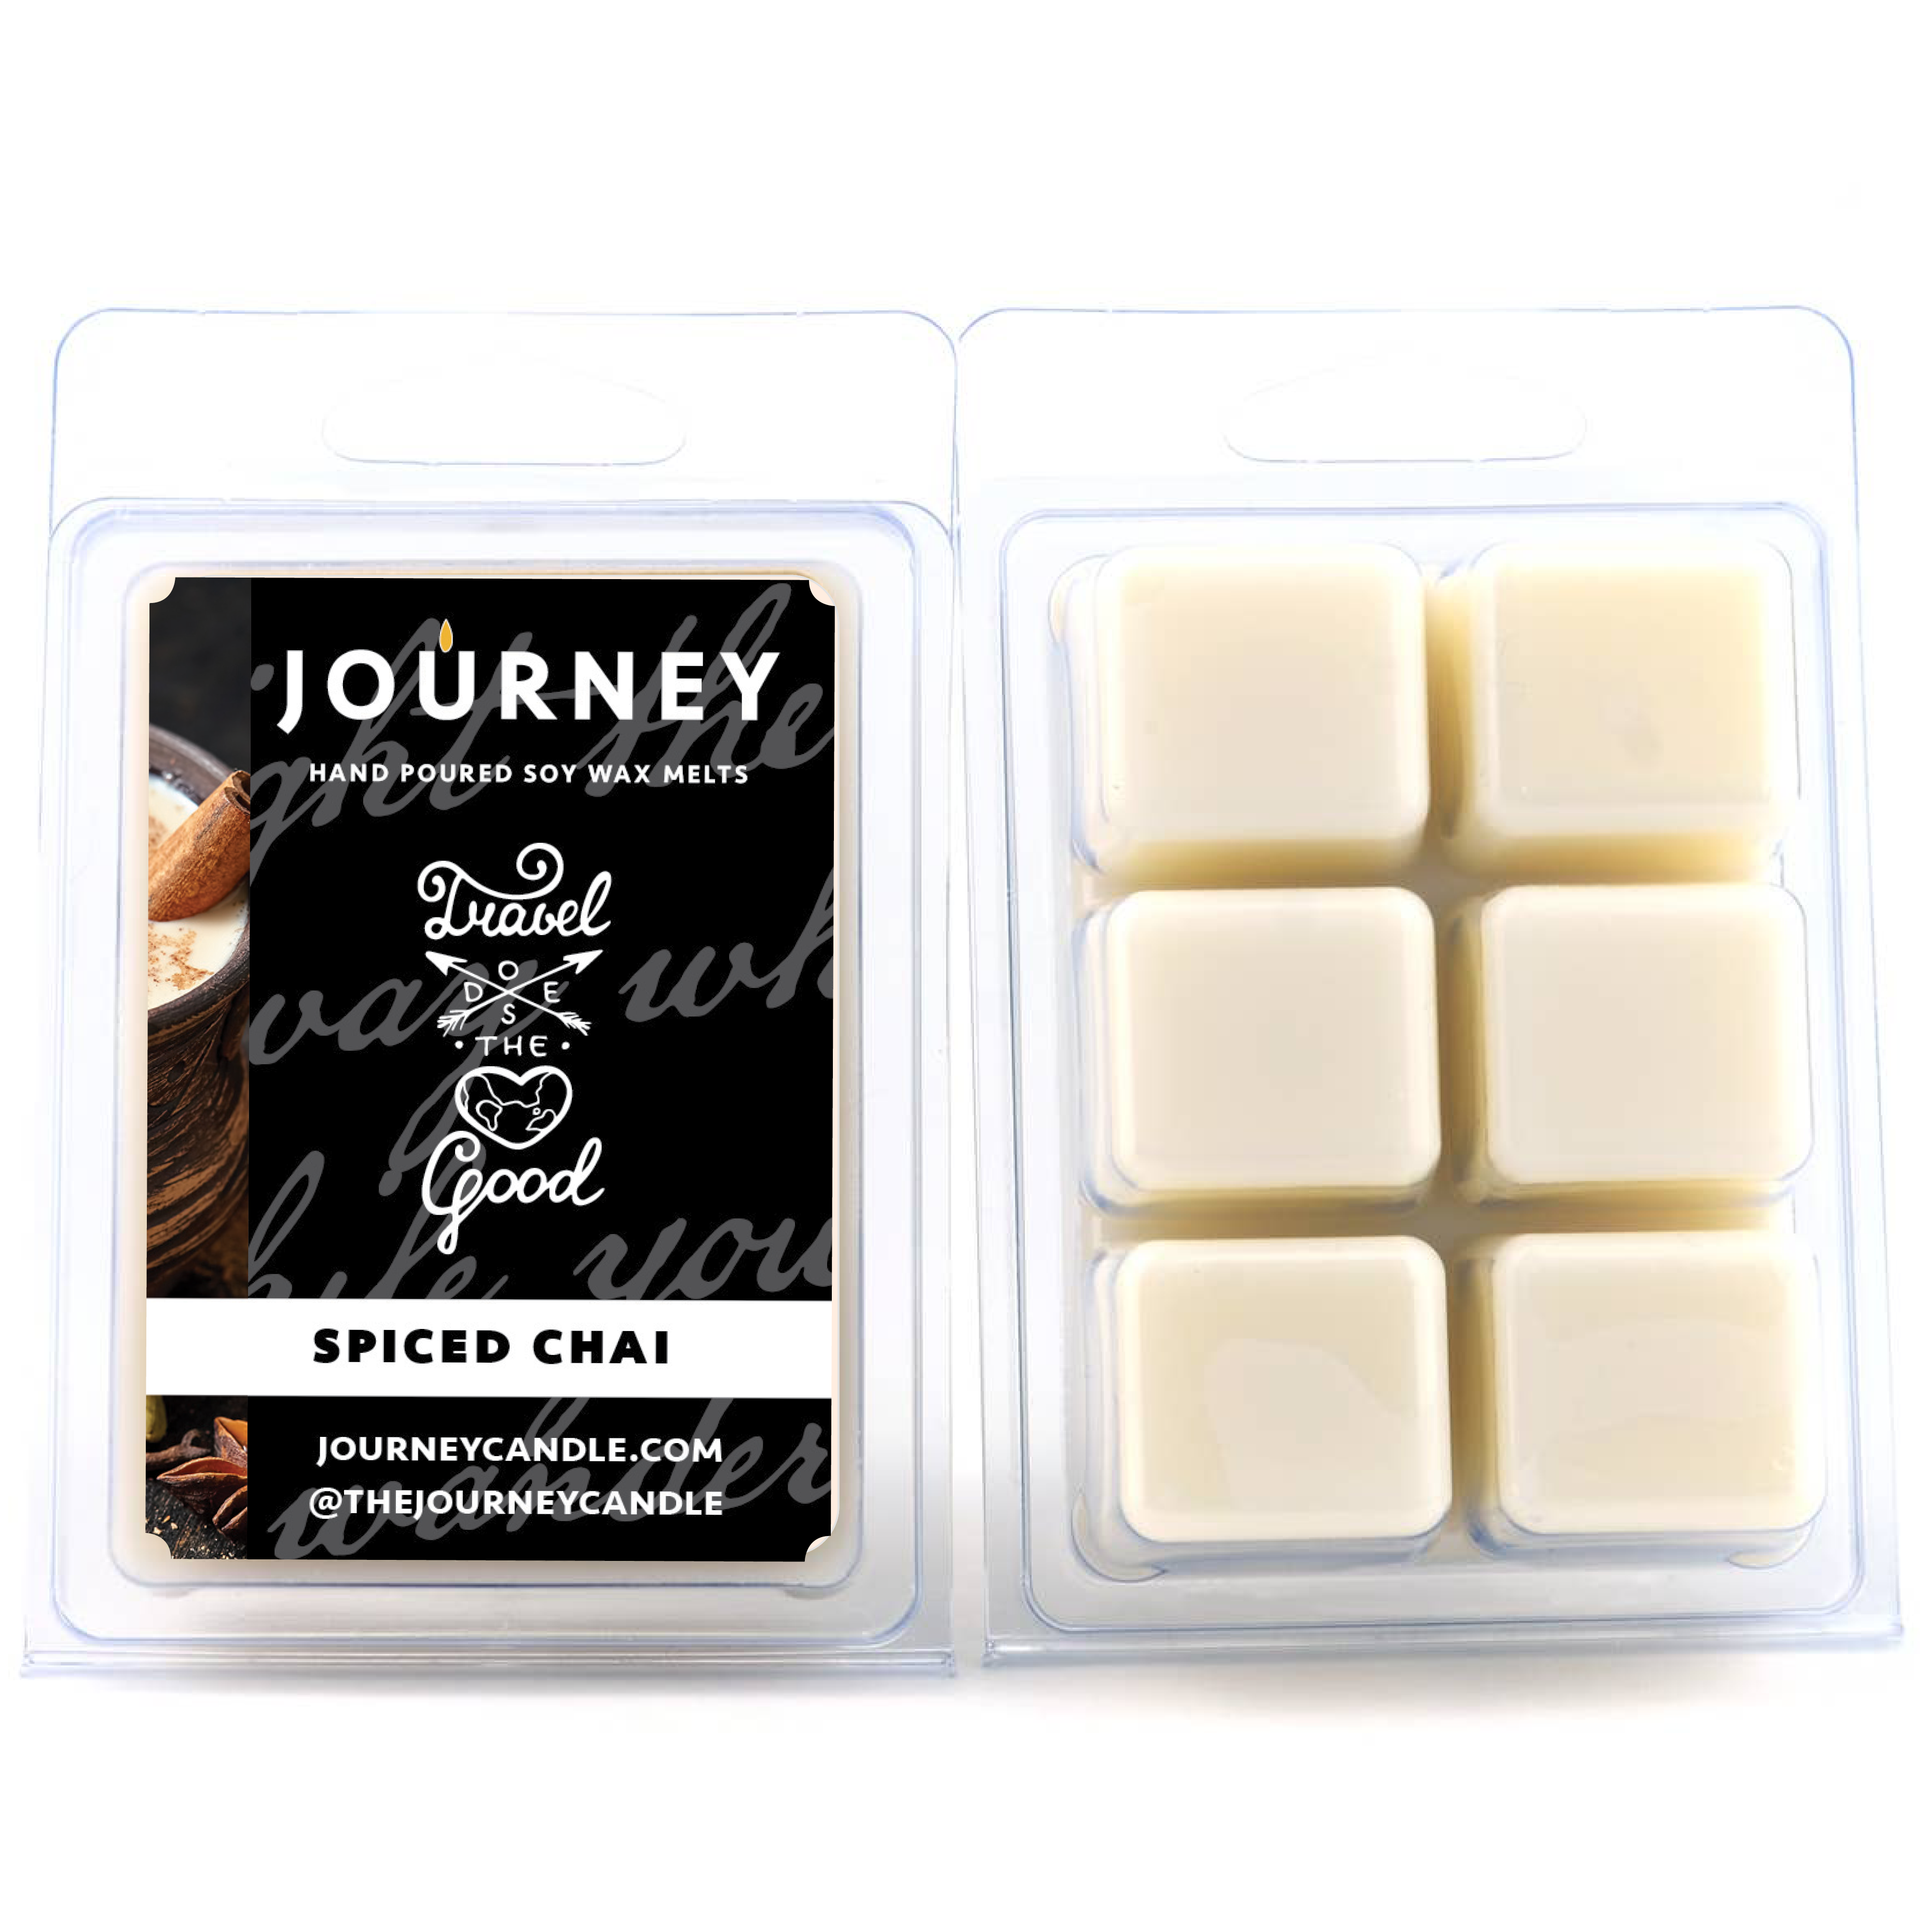 Spiced Chai Journey Soy Wax Melts – Journey Candle